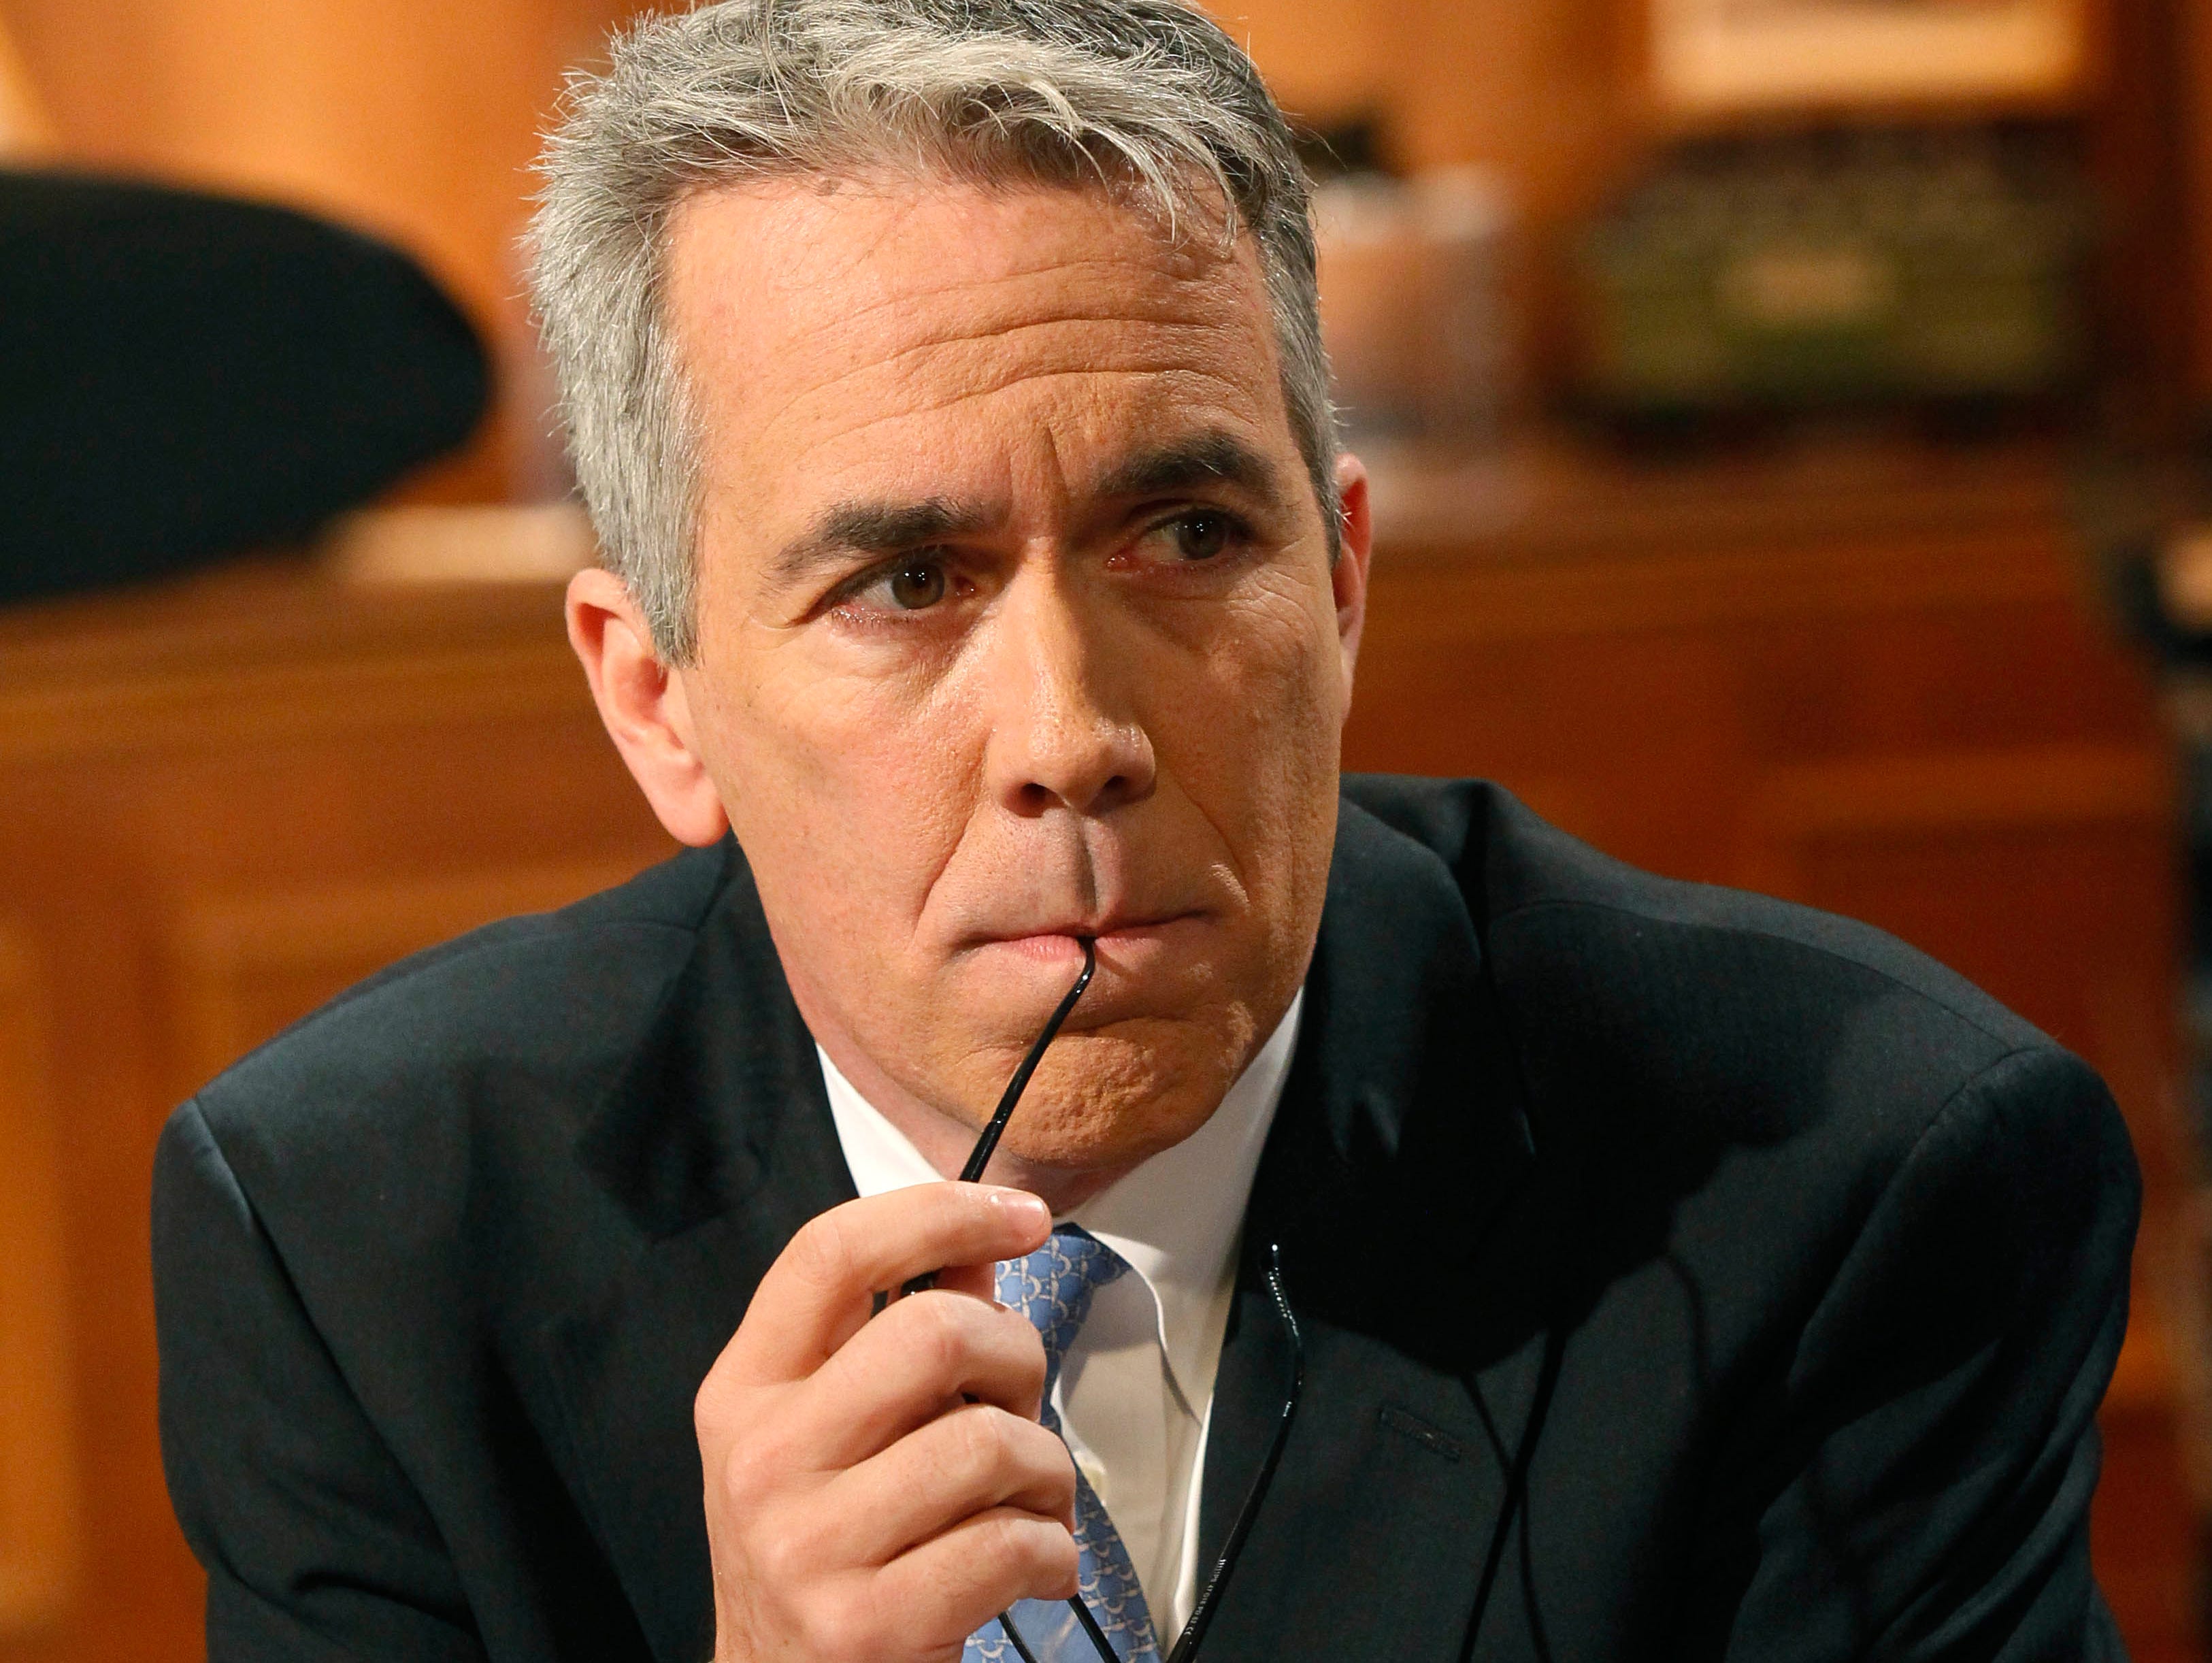 U.S. Rep. Joe Walsh, R-Ill., waits for the start of a televised debate against challenger Democrat Tammy Duckworth at the WTTW studios Oct. 18, 2012, in Chicago.